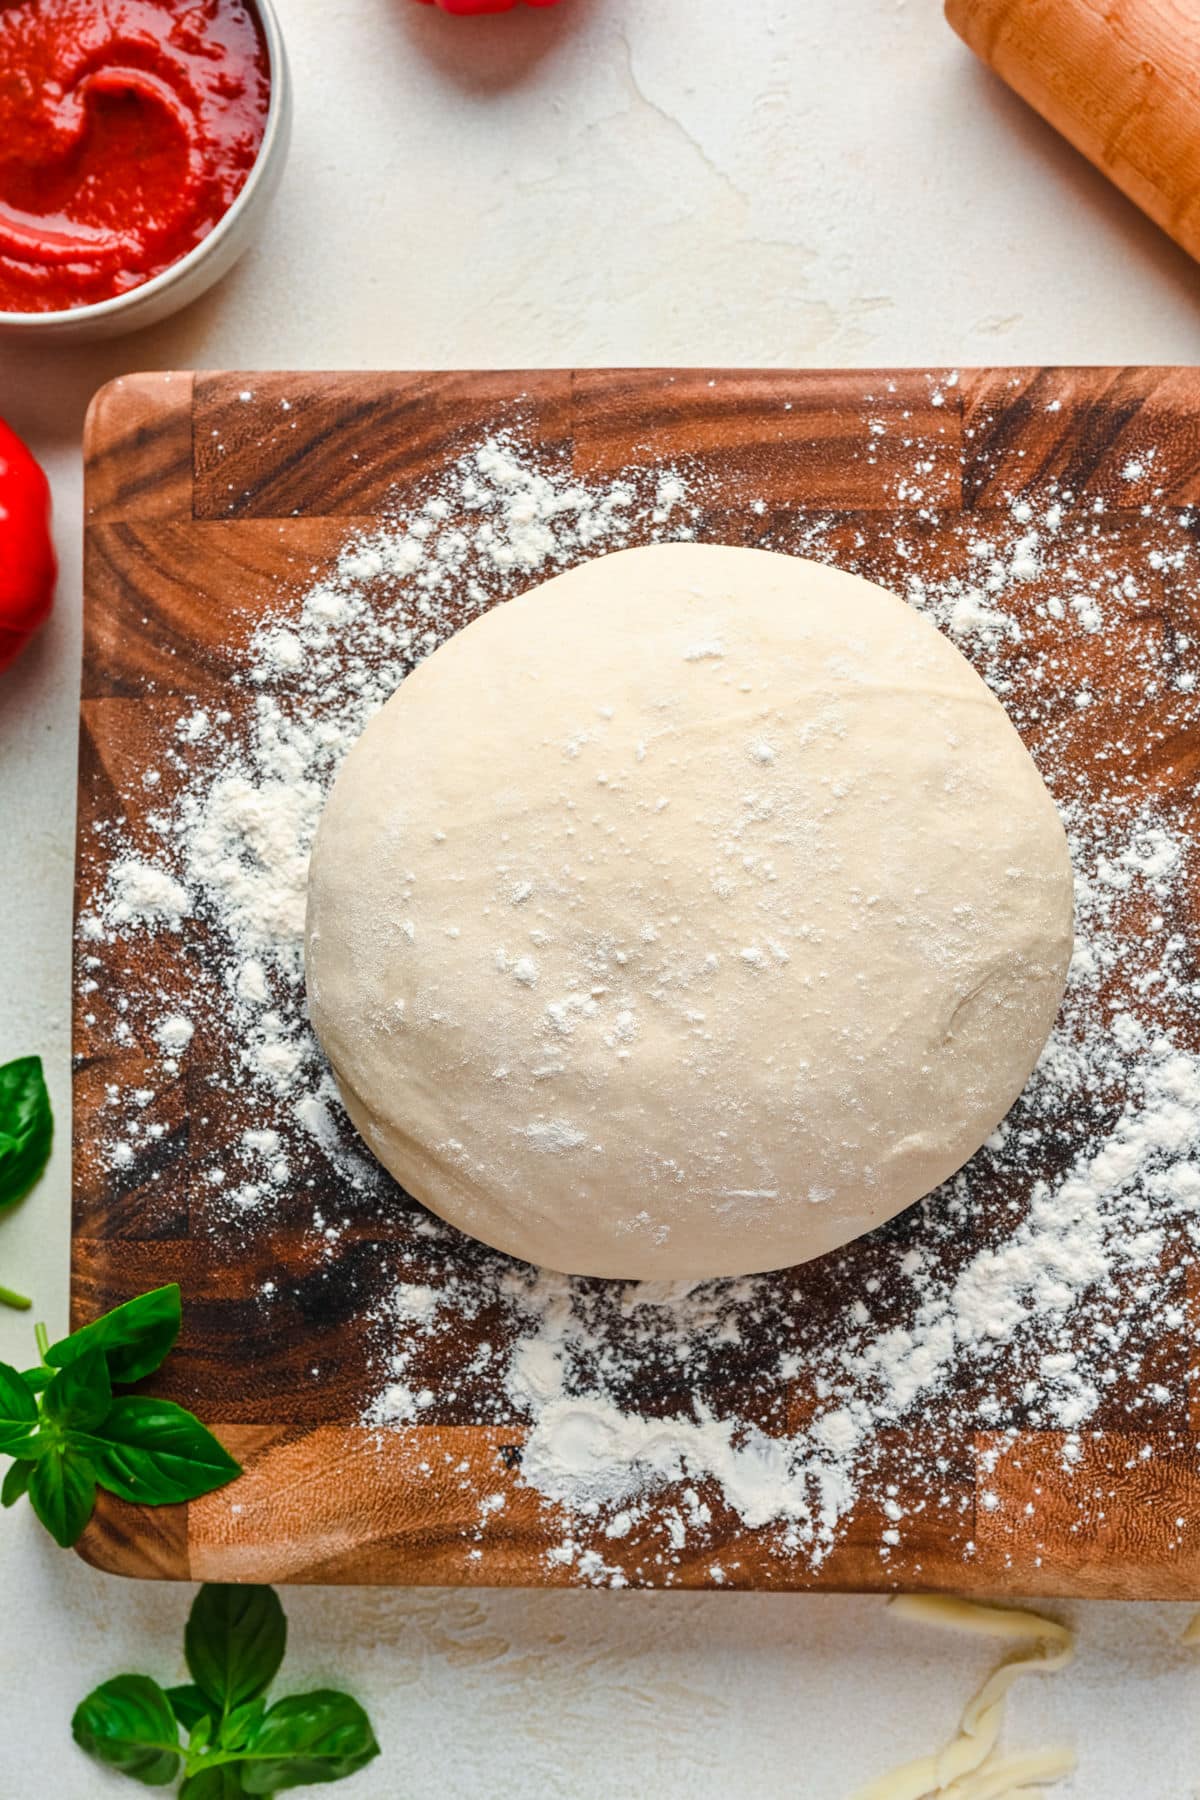 A ball of homemade pizza dough on a wooden cutting board next to a rolling pin.